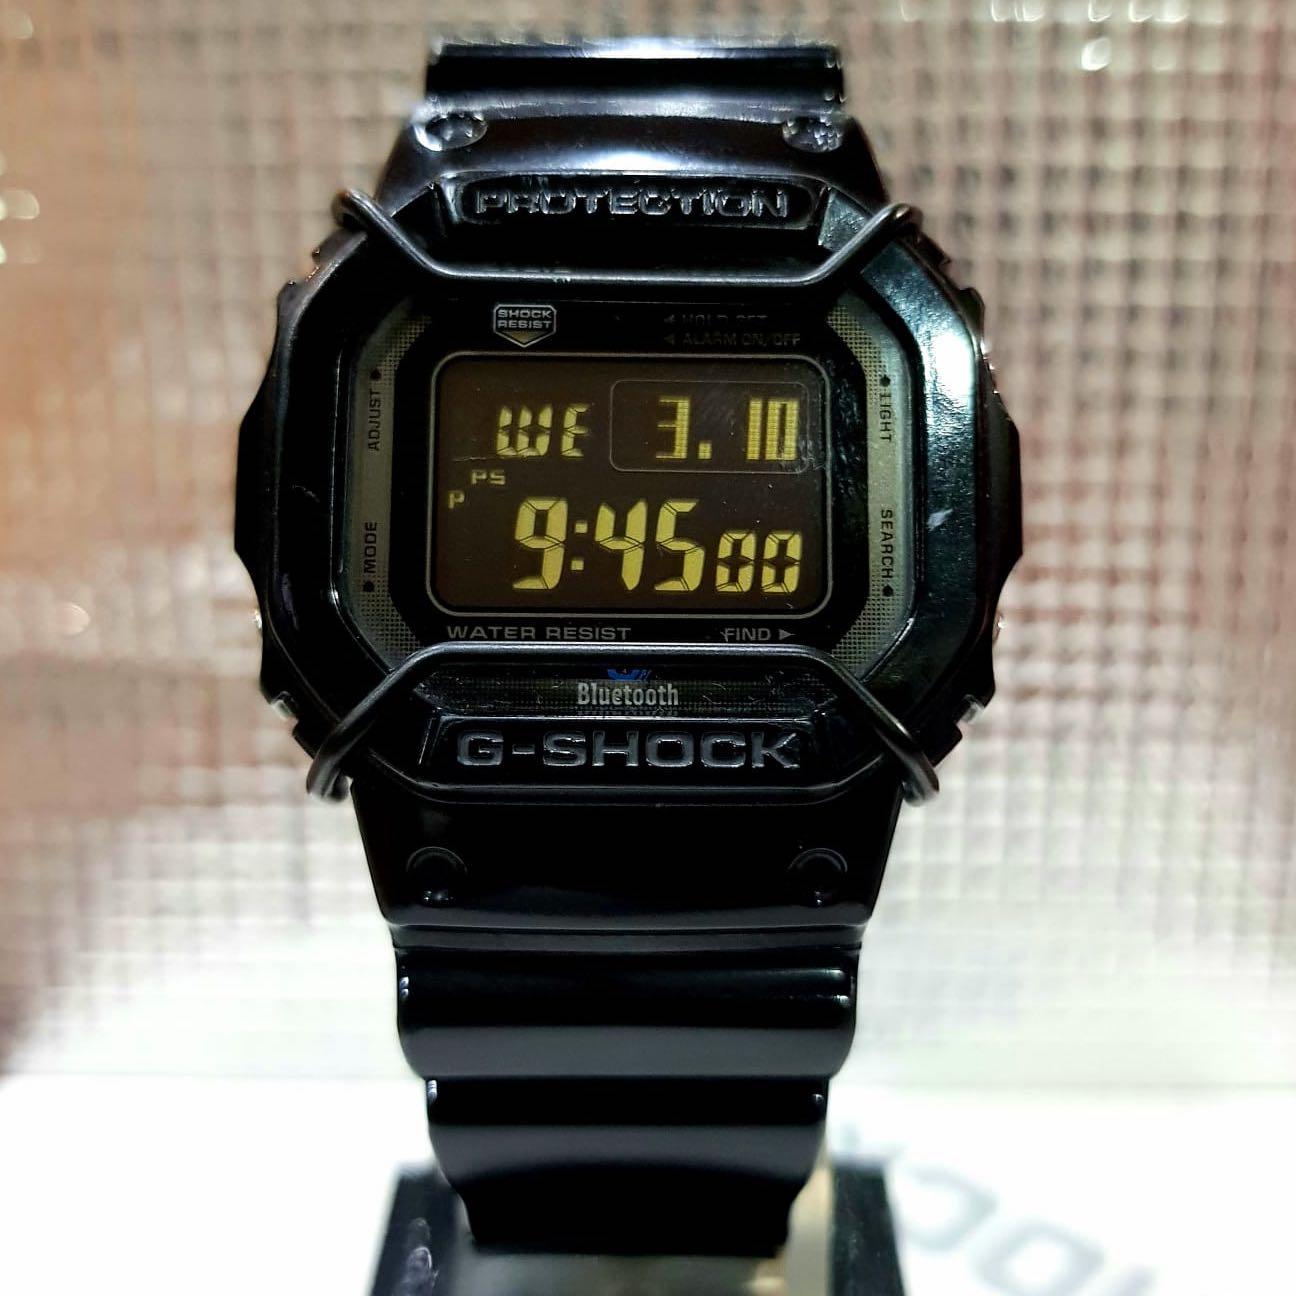 Used Gshock Bluetooth Diver Unisex Sports Watch 100 Original Authentic Casio G Shock Gb 5600ab 1adr Gb 5600ab 1a Luxury Watches On Carousell